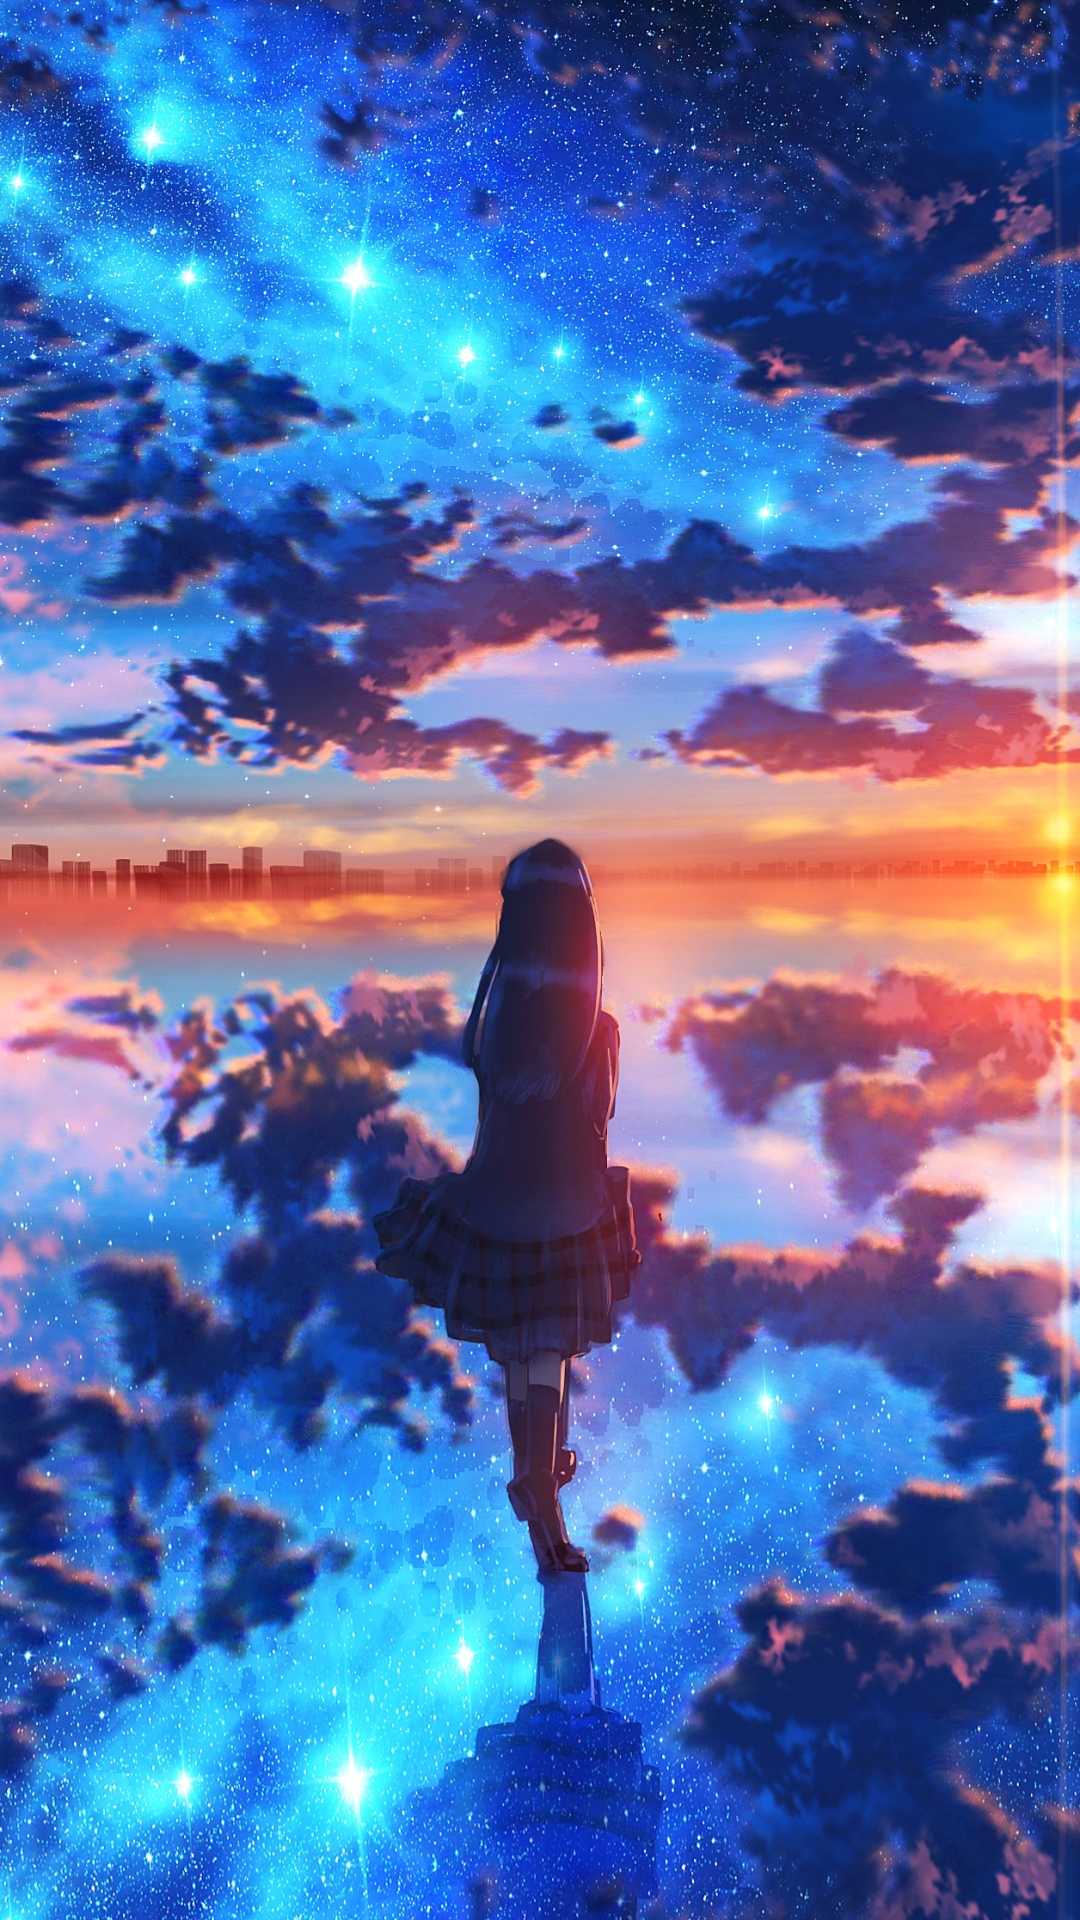 Anime Landscape Phone Wallpaper by 特務九 - Mobile Abyss